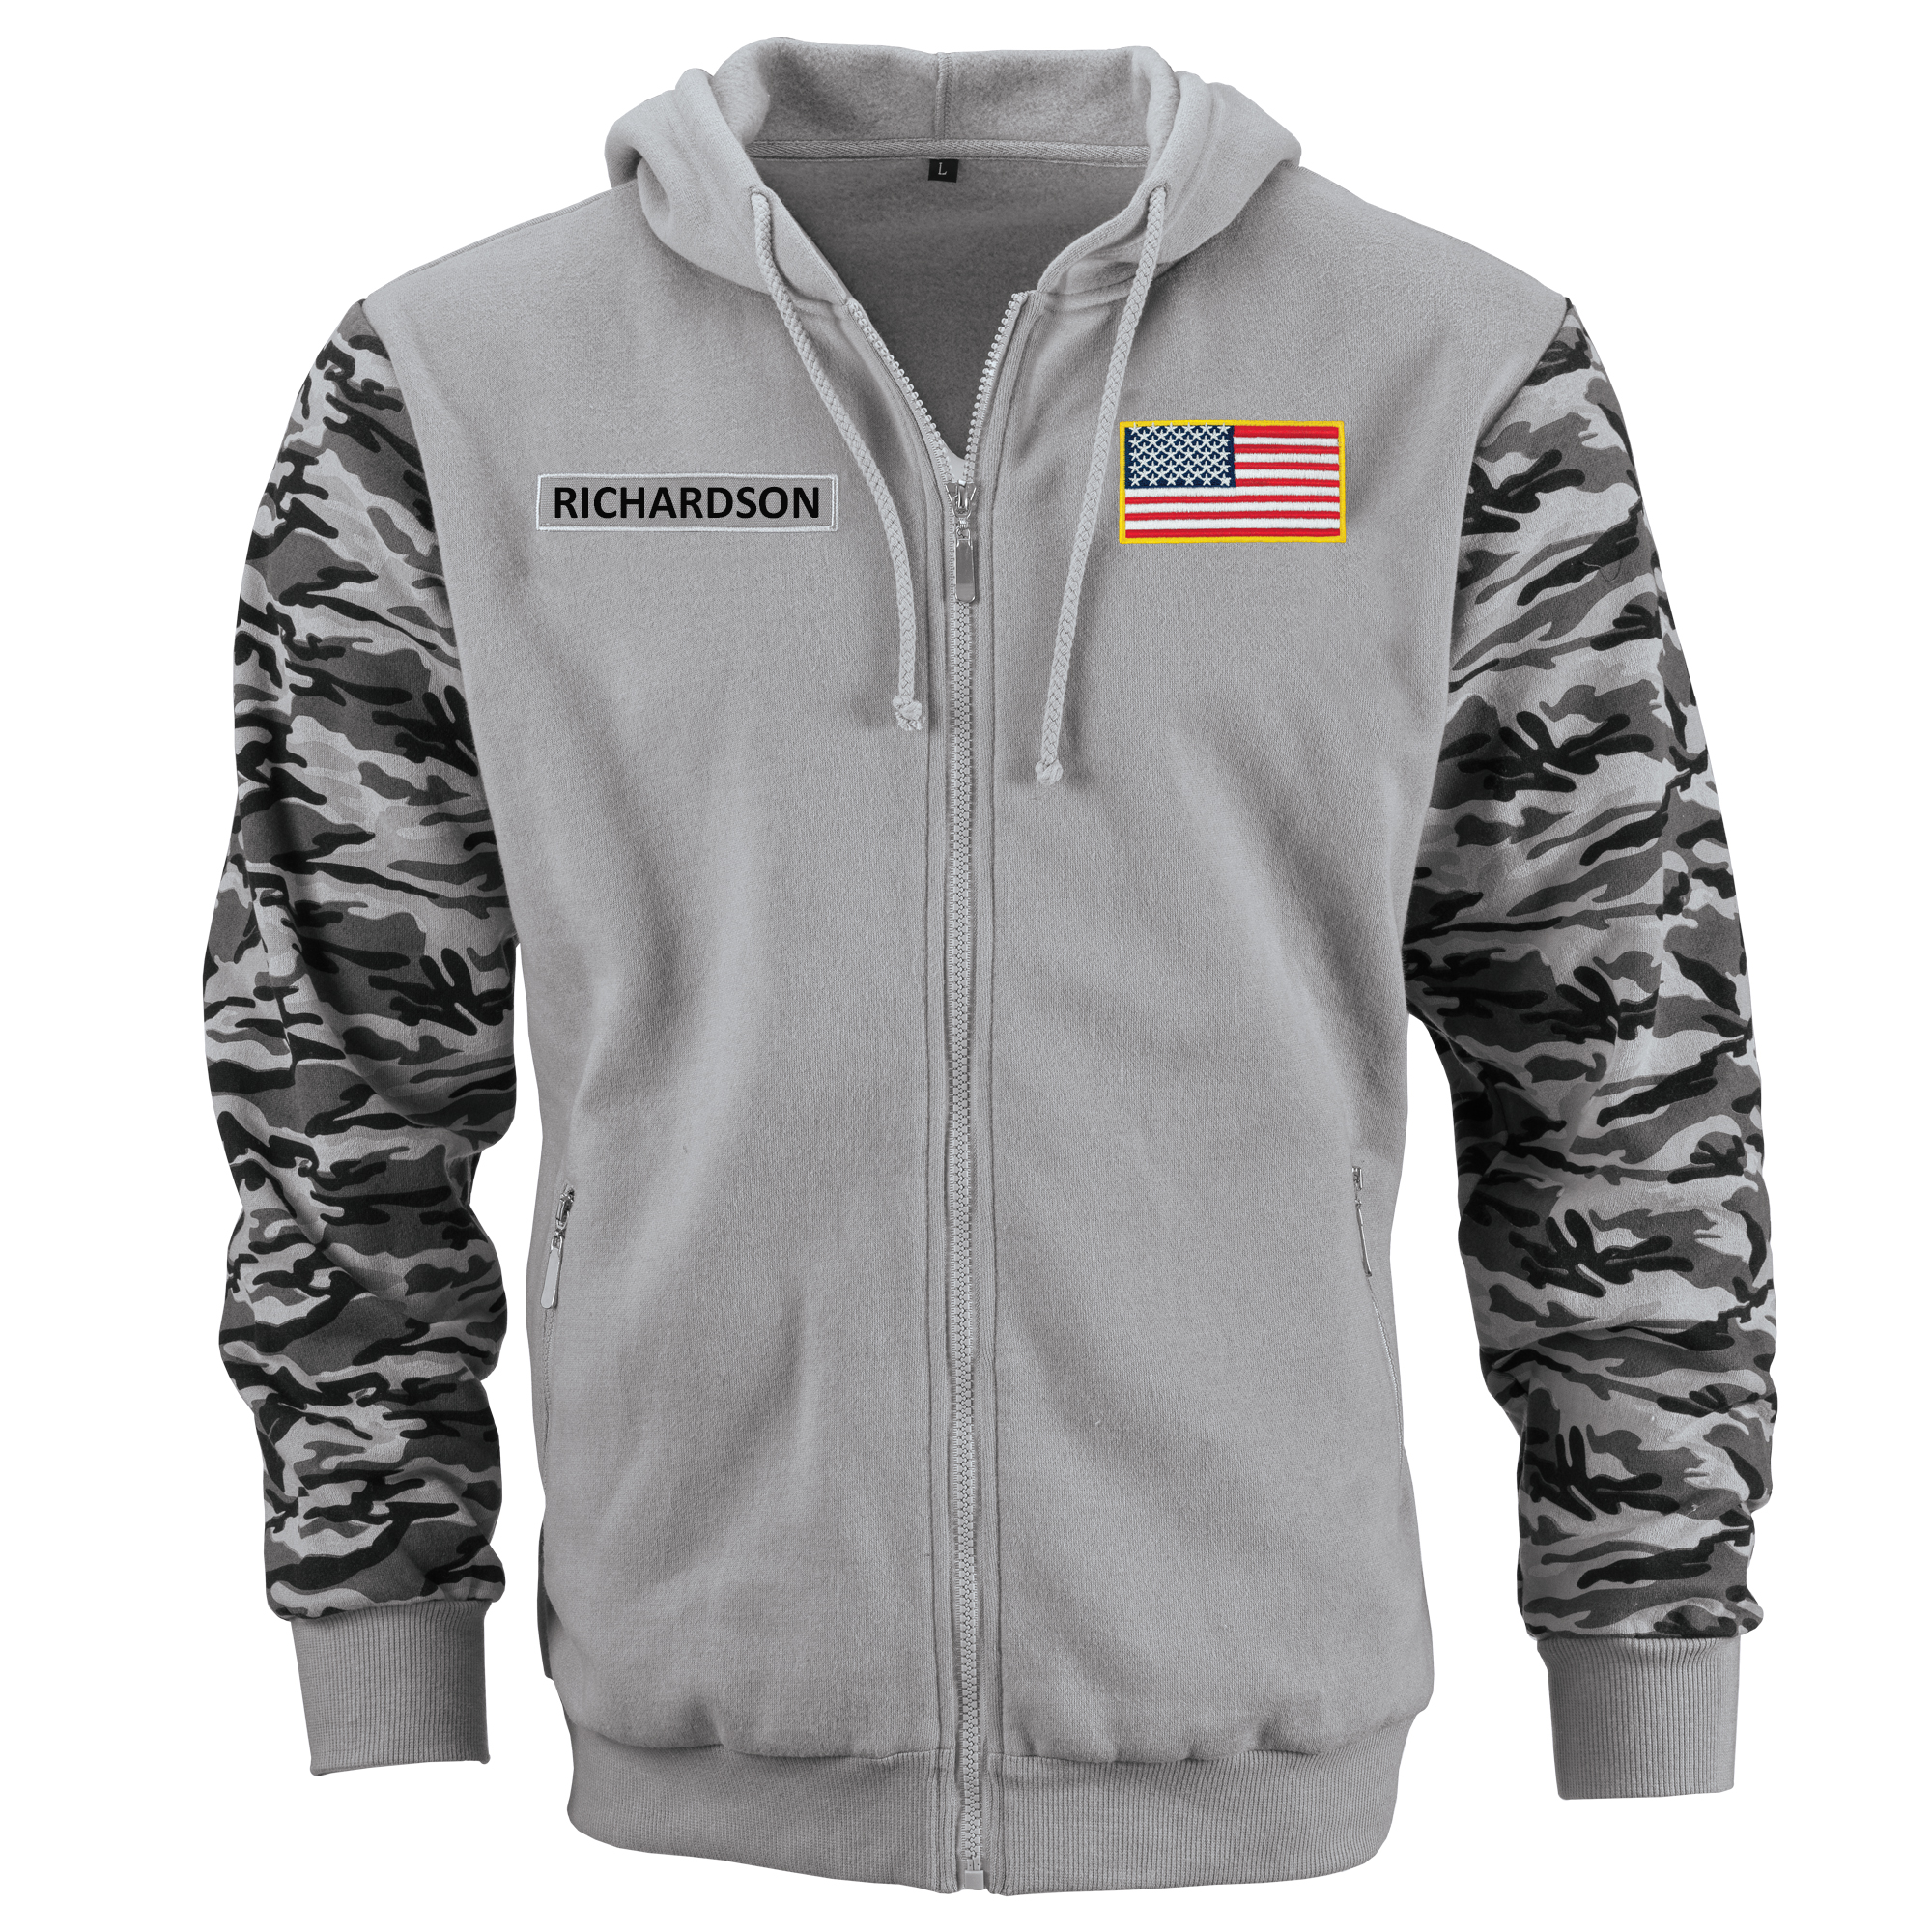 Personalized US Army Hoodie 10117 0017 a main - Military Hoodie